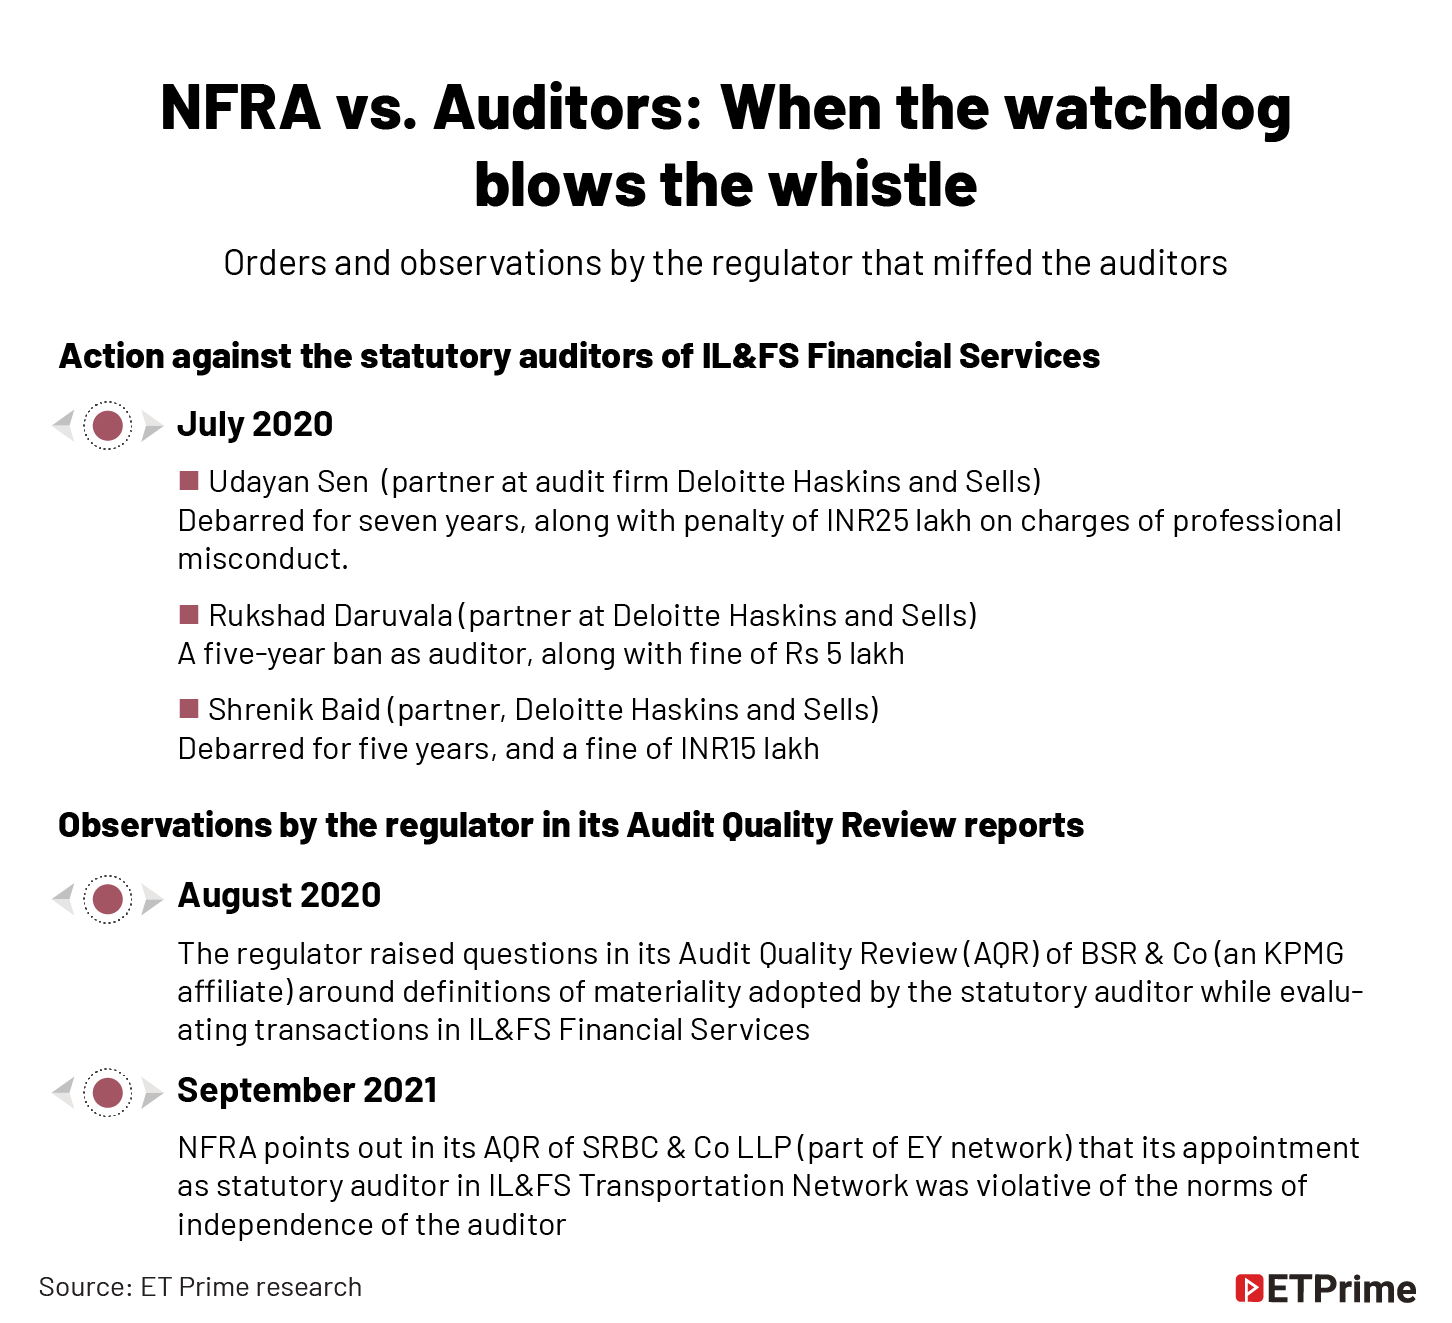 NFRA vs. Auditors- When the watchdog _blows the whistle @2x